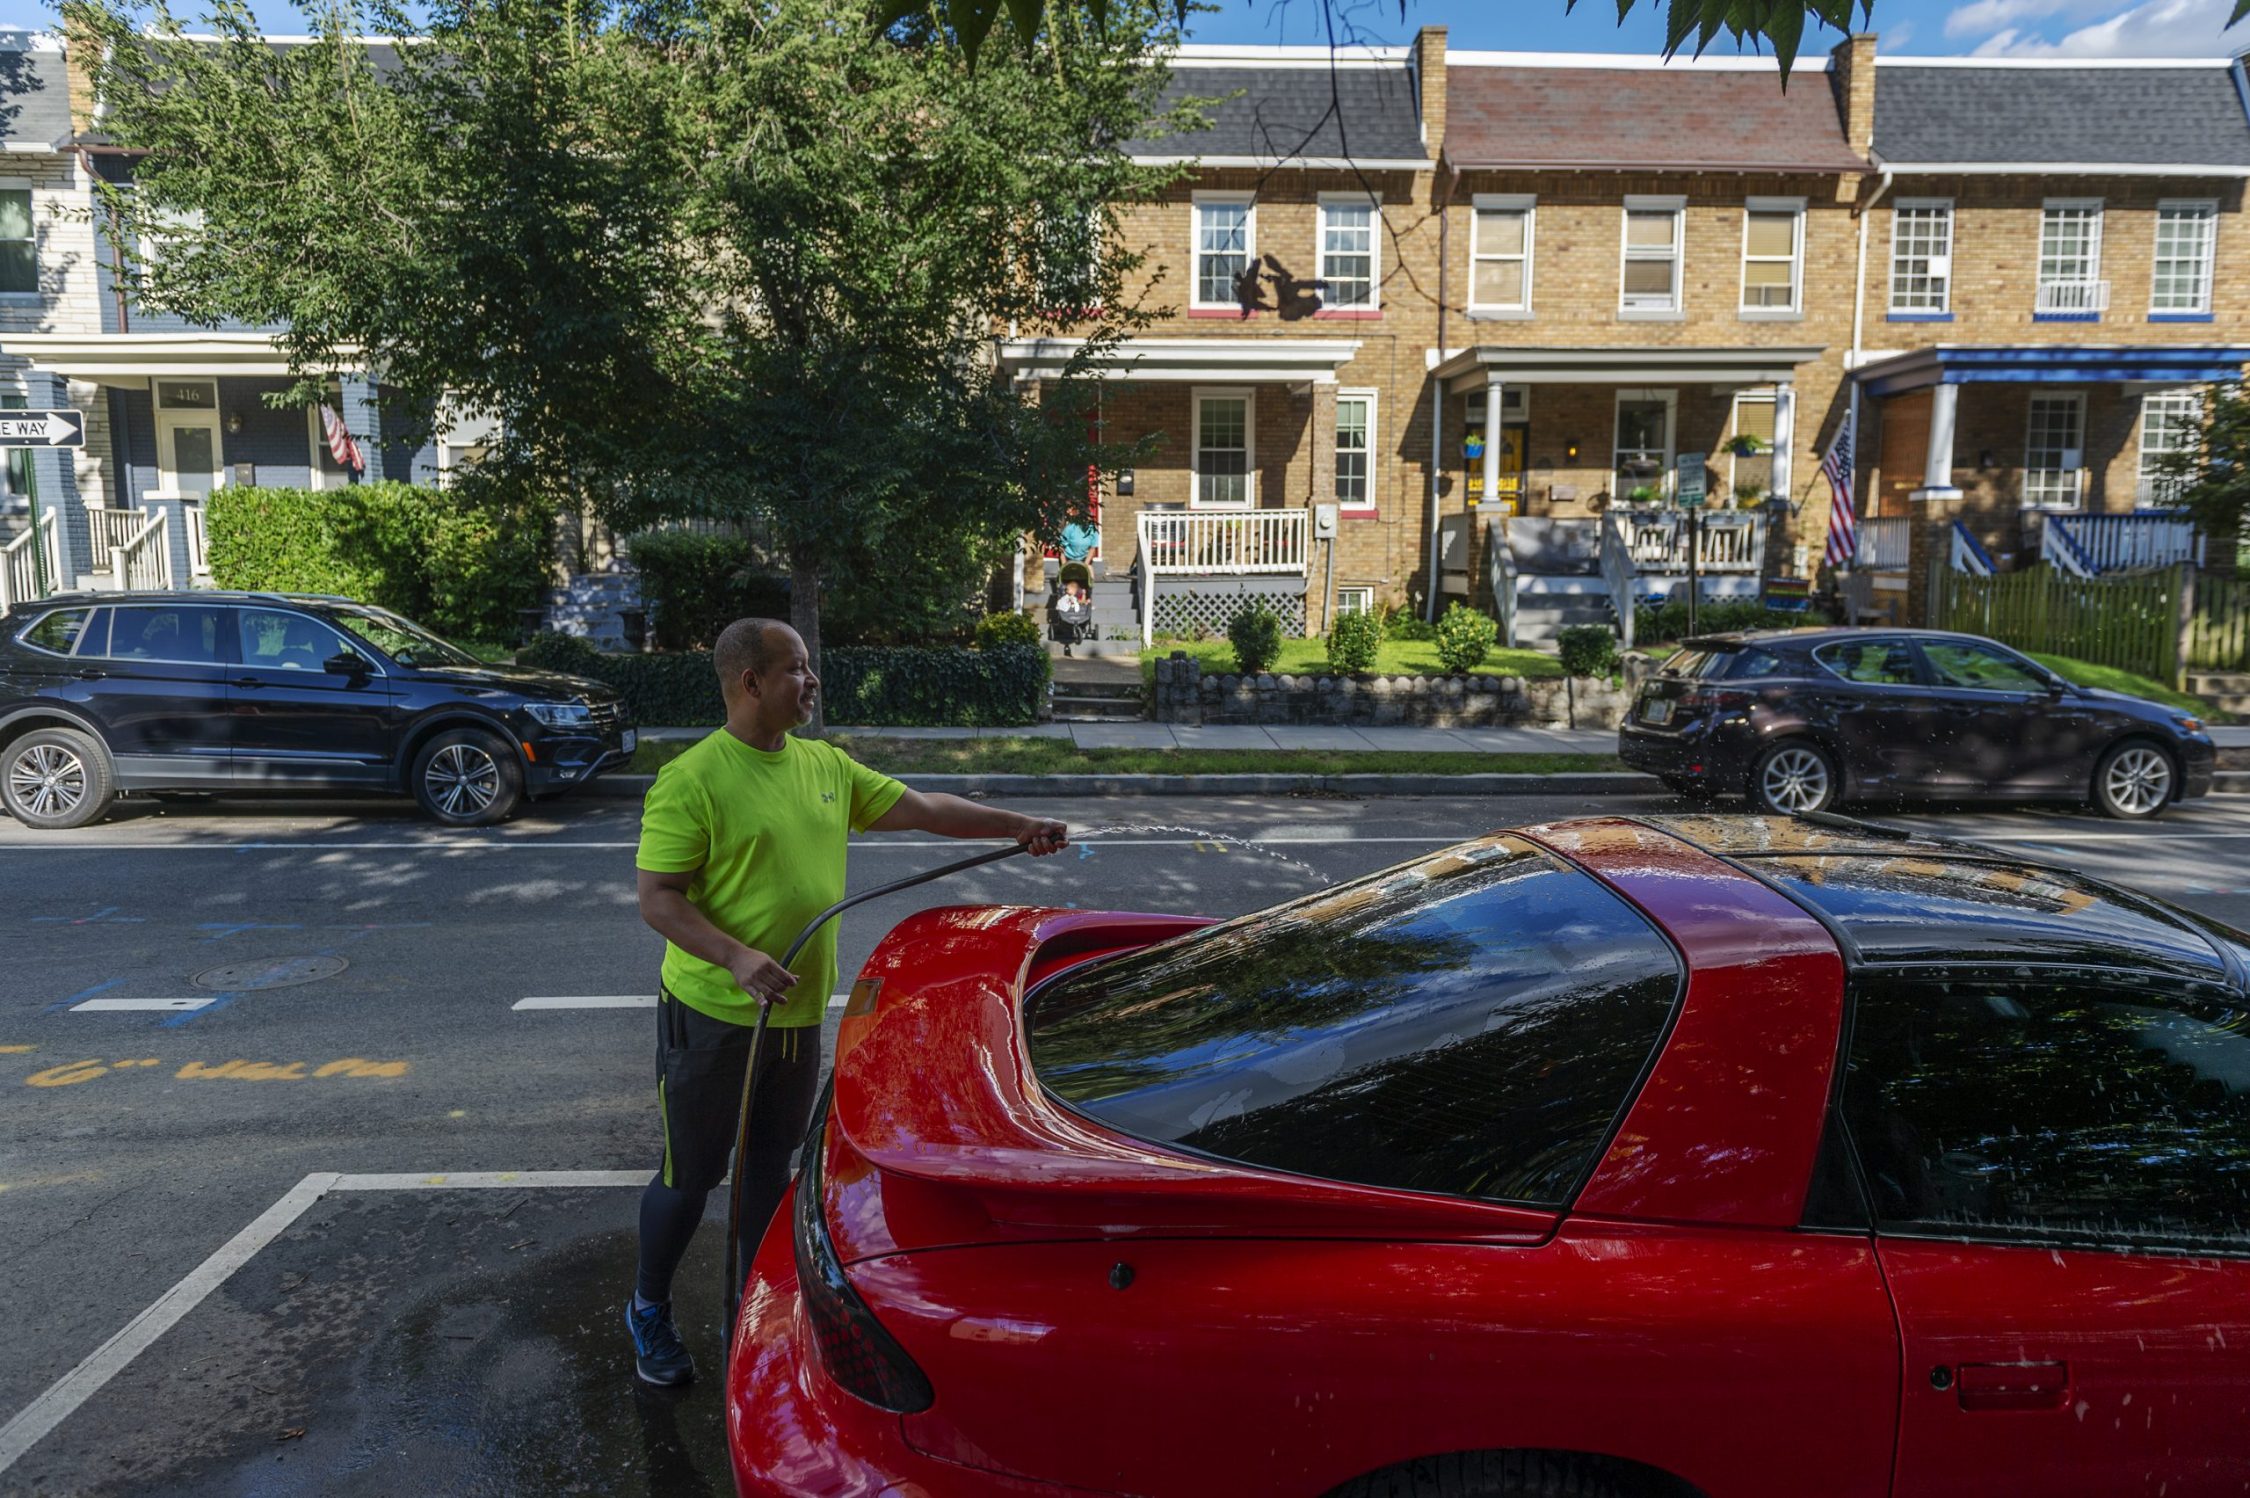 John Branscomb washes his car in the Barney Circle neighborhood in Washington, DC, on August 30, 2020.